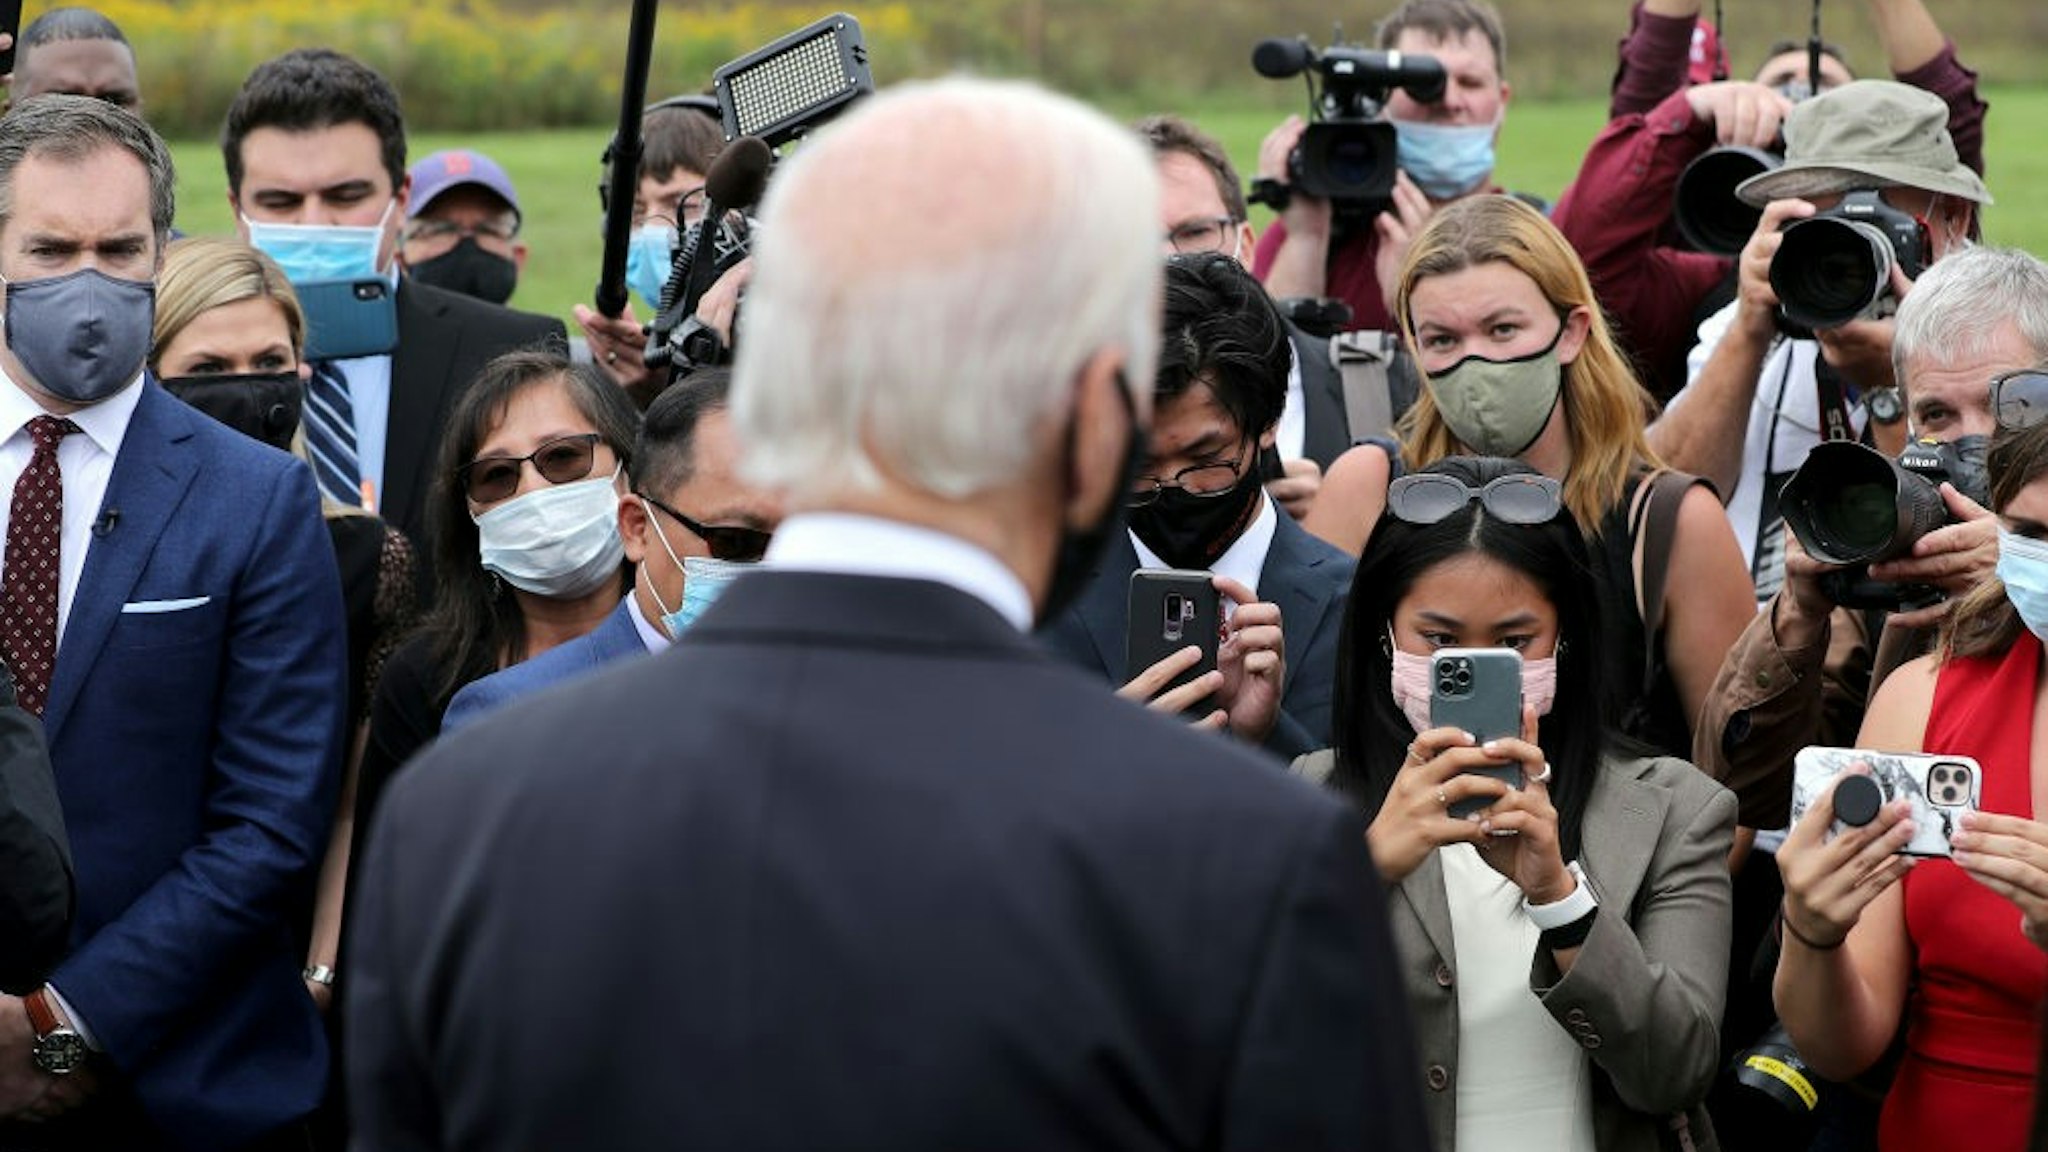 SHANKSVILLE, PA - SEPTEMBER 11: Democratic presidential nominee and former Vice President Joe Biden talks to journalist after laying a wreath at the Flight 93 National Memorial on the 19th anniversary of the 9/11 terror attacks September 11, 2020 in Shanksville, Pennsylvania. Earlier in the day the Biden attended a remembrance ceremony at the September 11 National Memorial in New York City. (Photo by